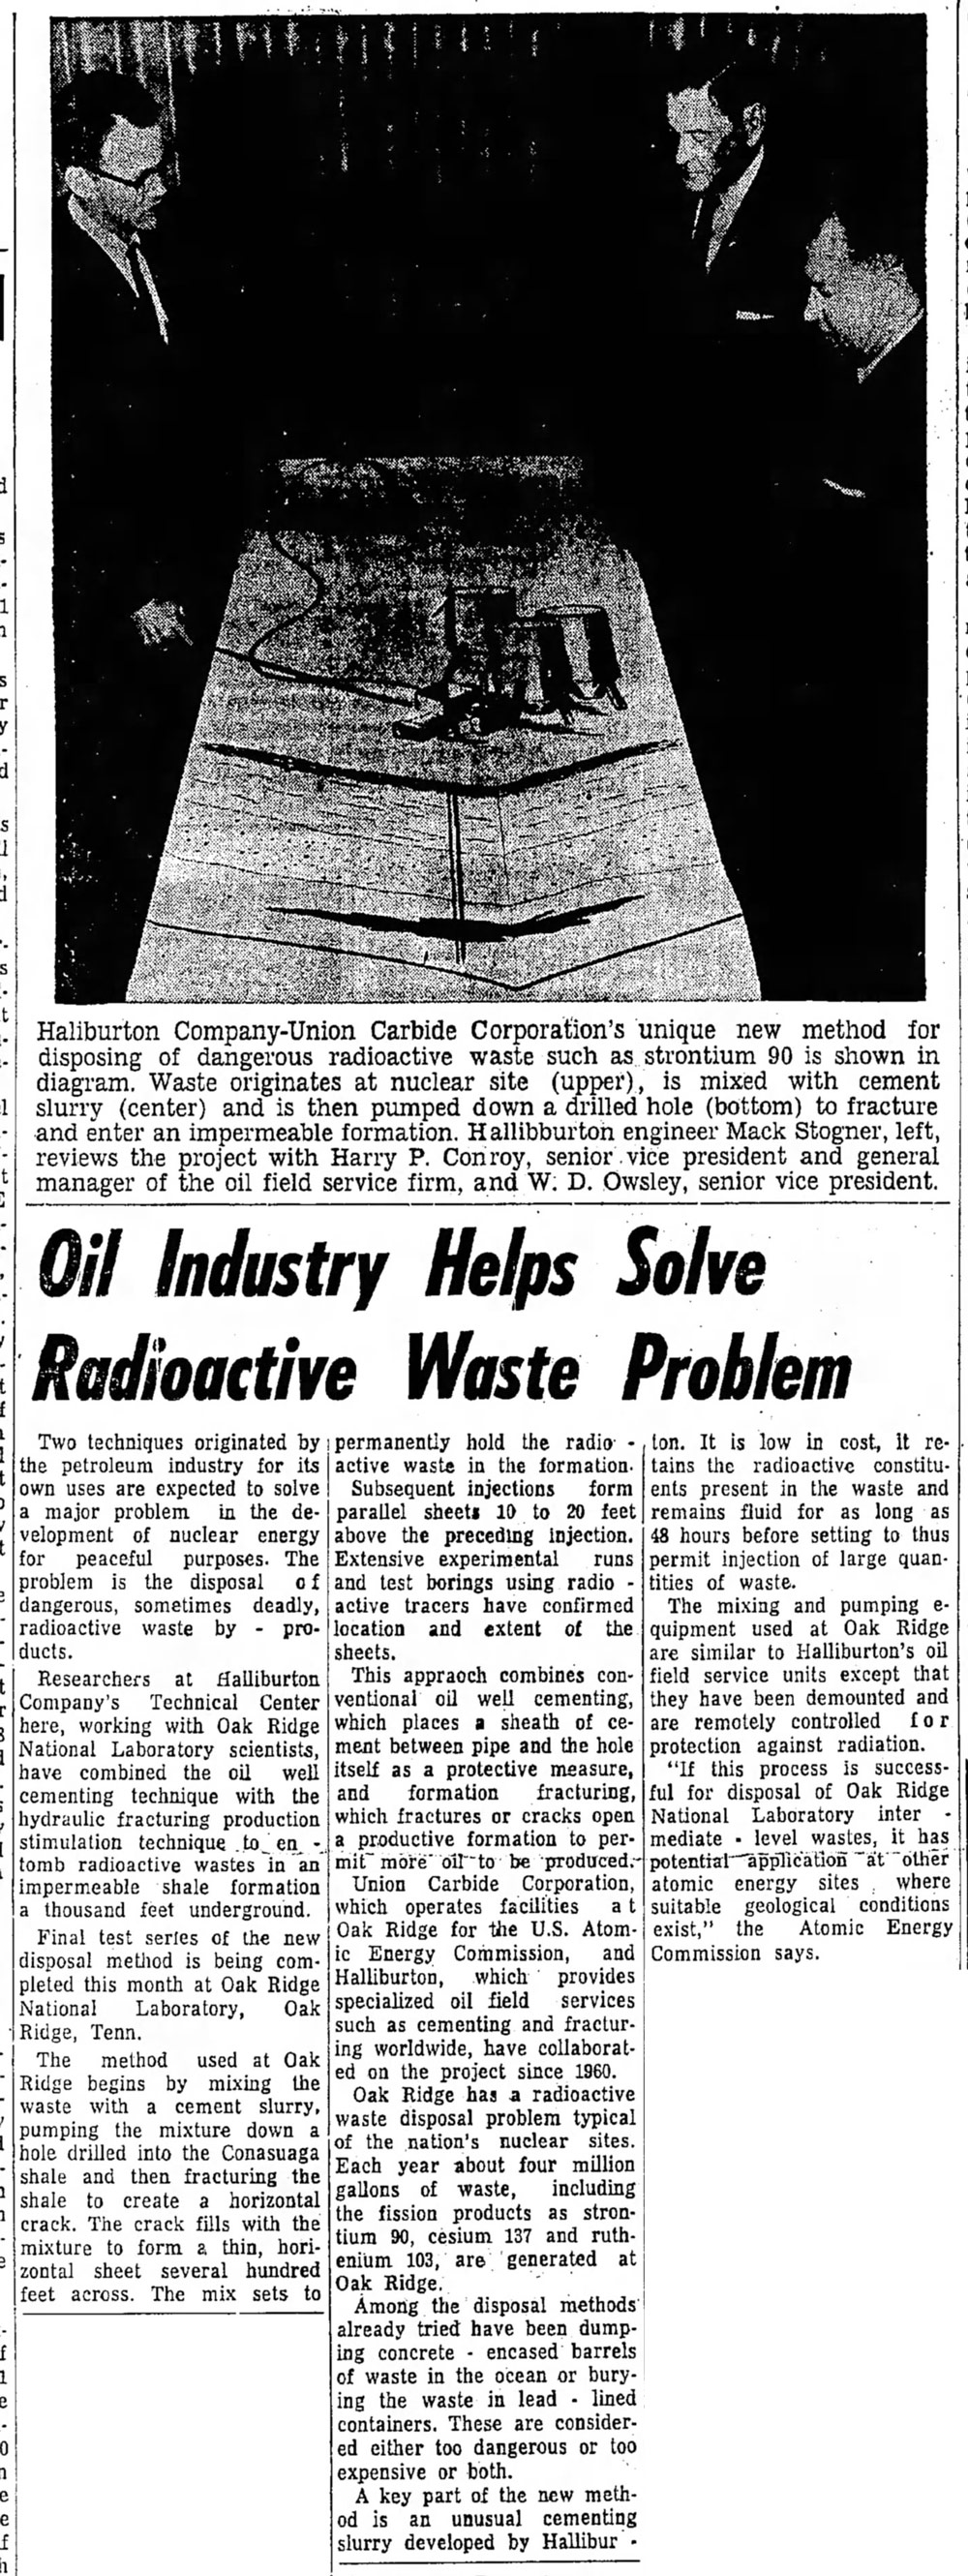 Shock - Fracking Used to Inject Nuclear Waste Underground for Decades - Great Bend Tribune Sun Apr 19, 1964